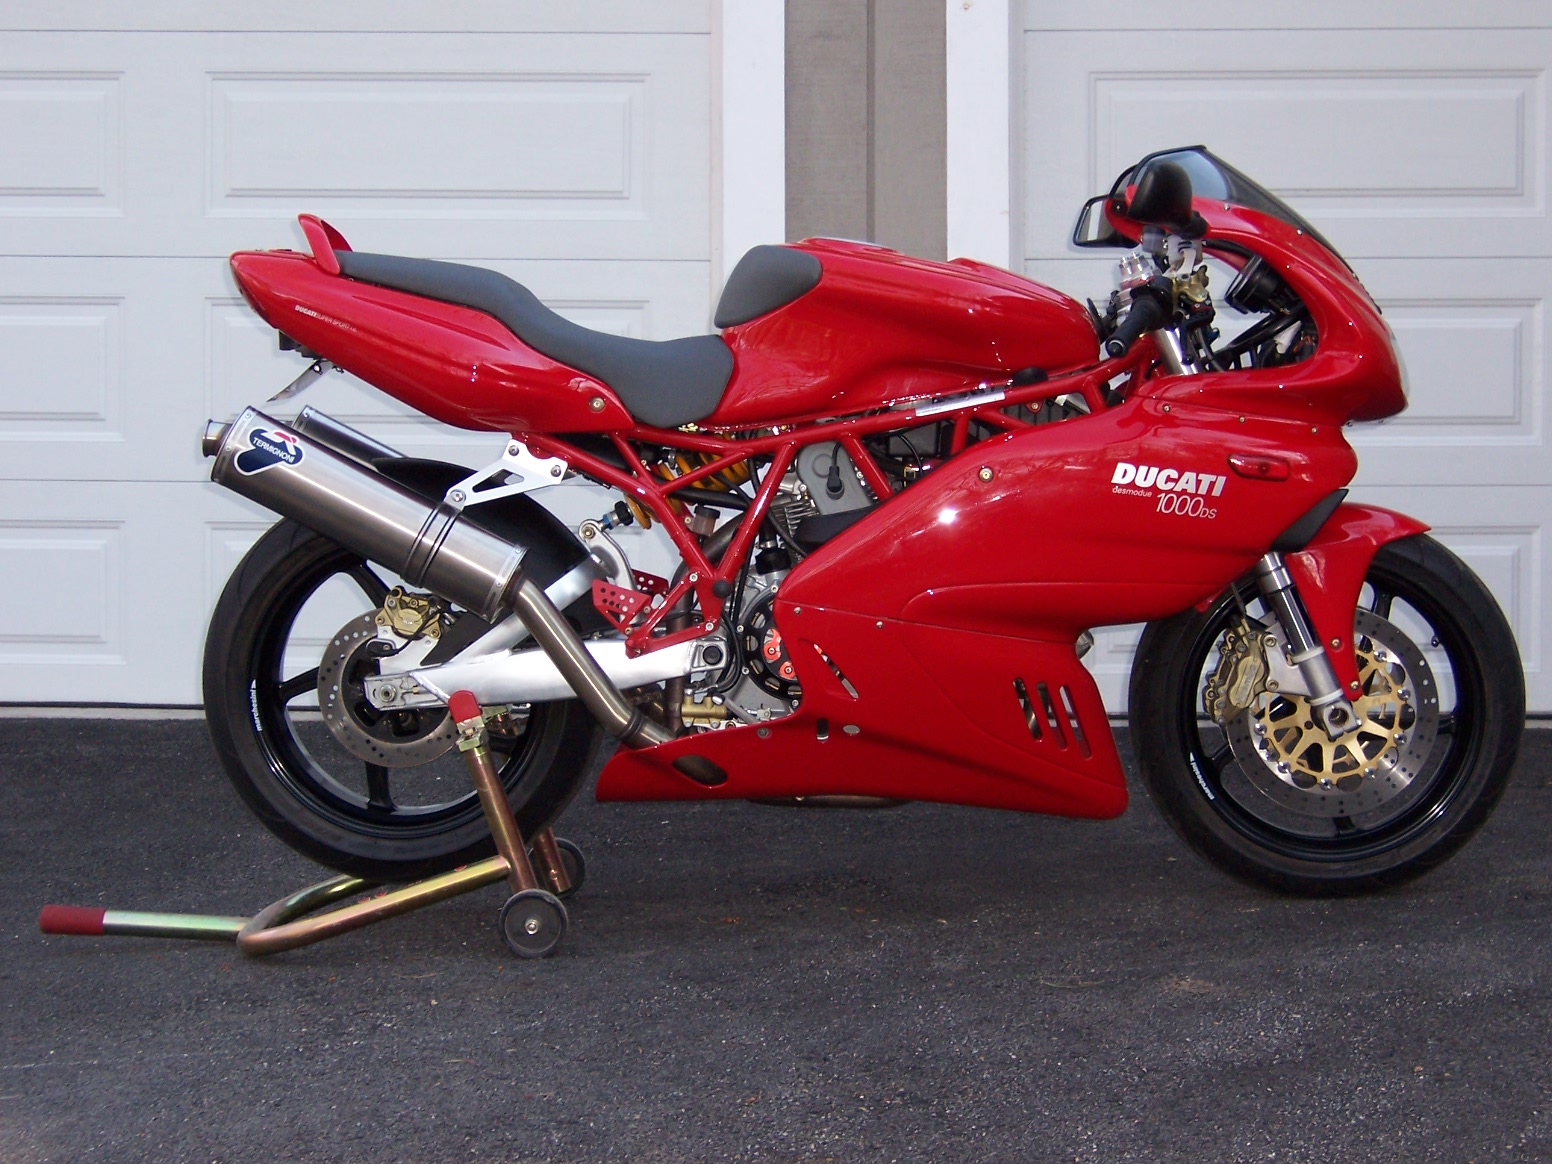 Ducati 1000 Supersport DS 2004 photo - 1